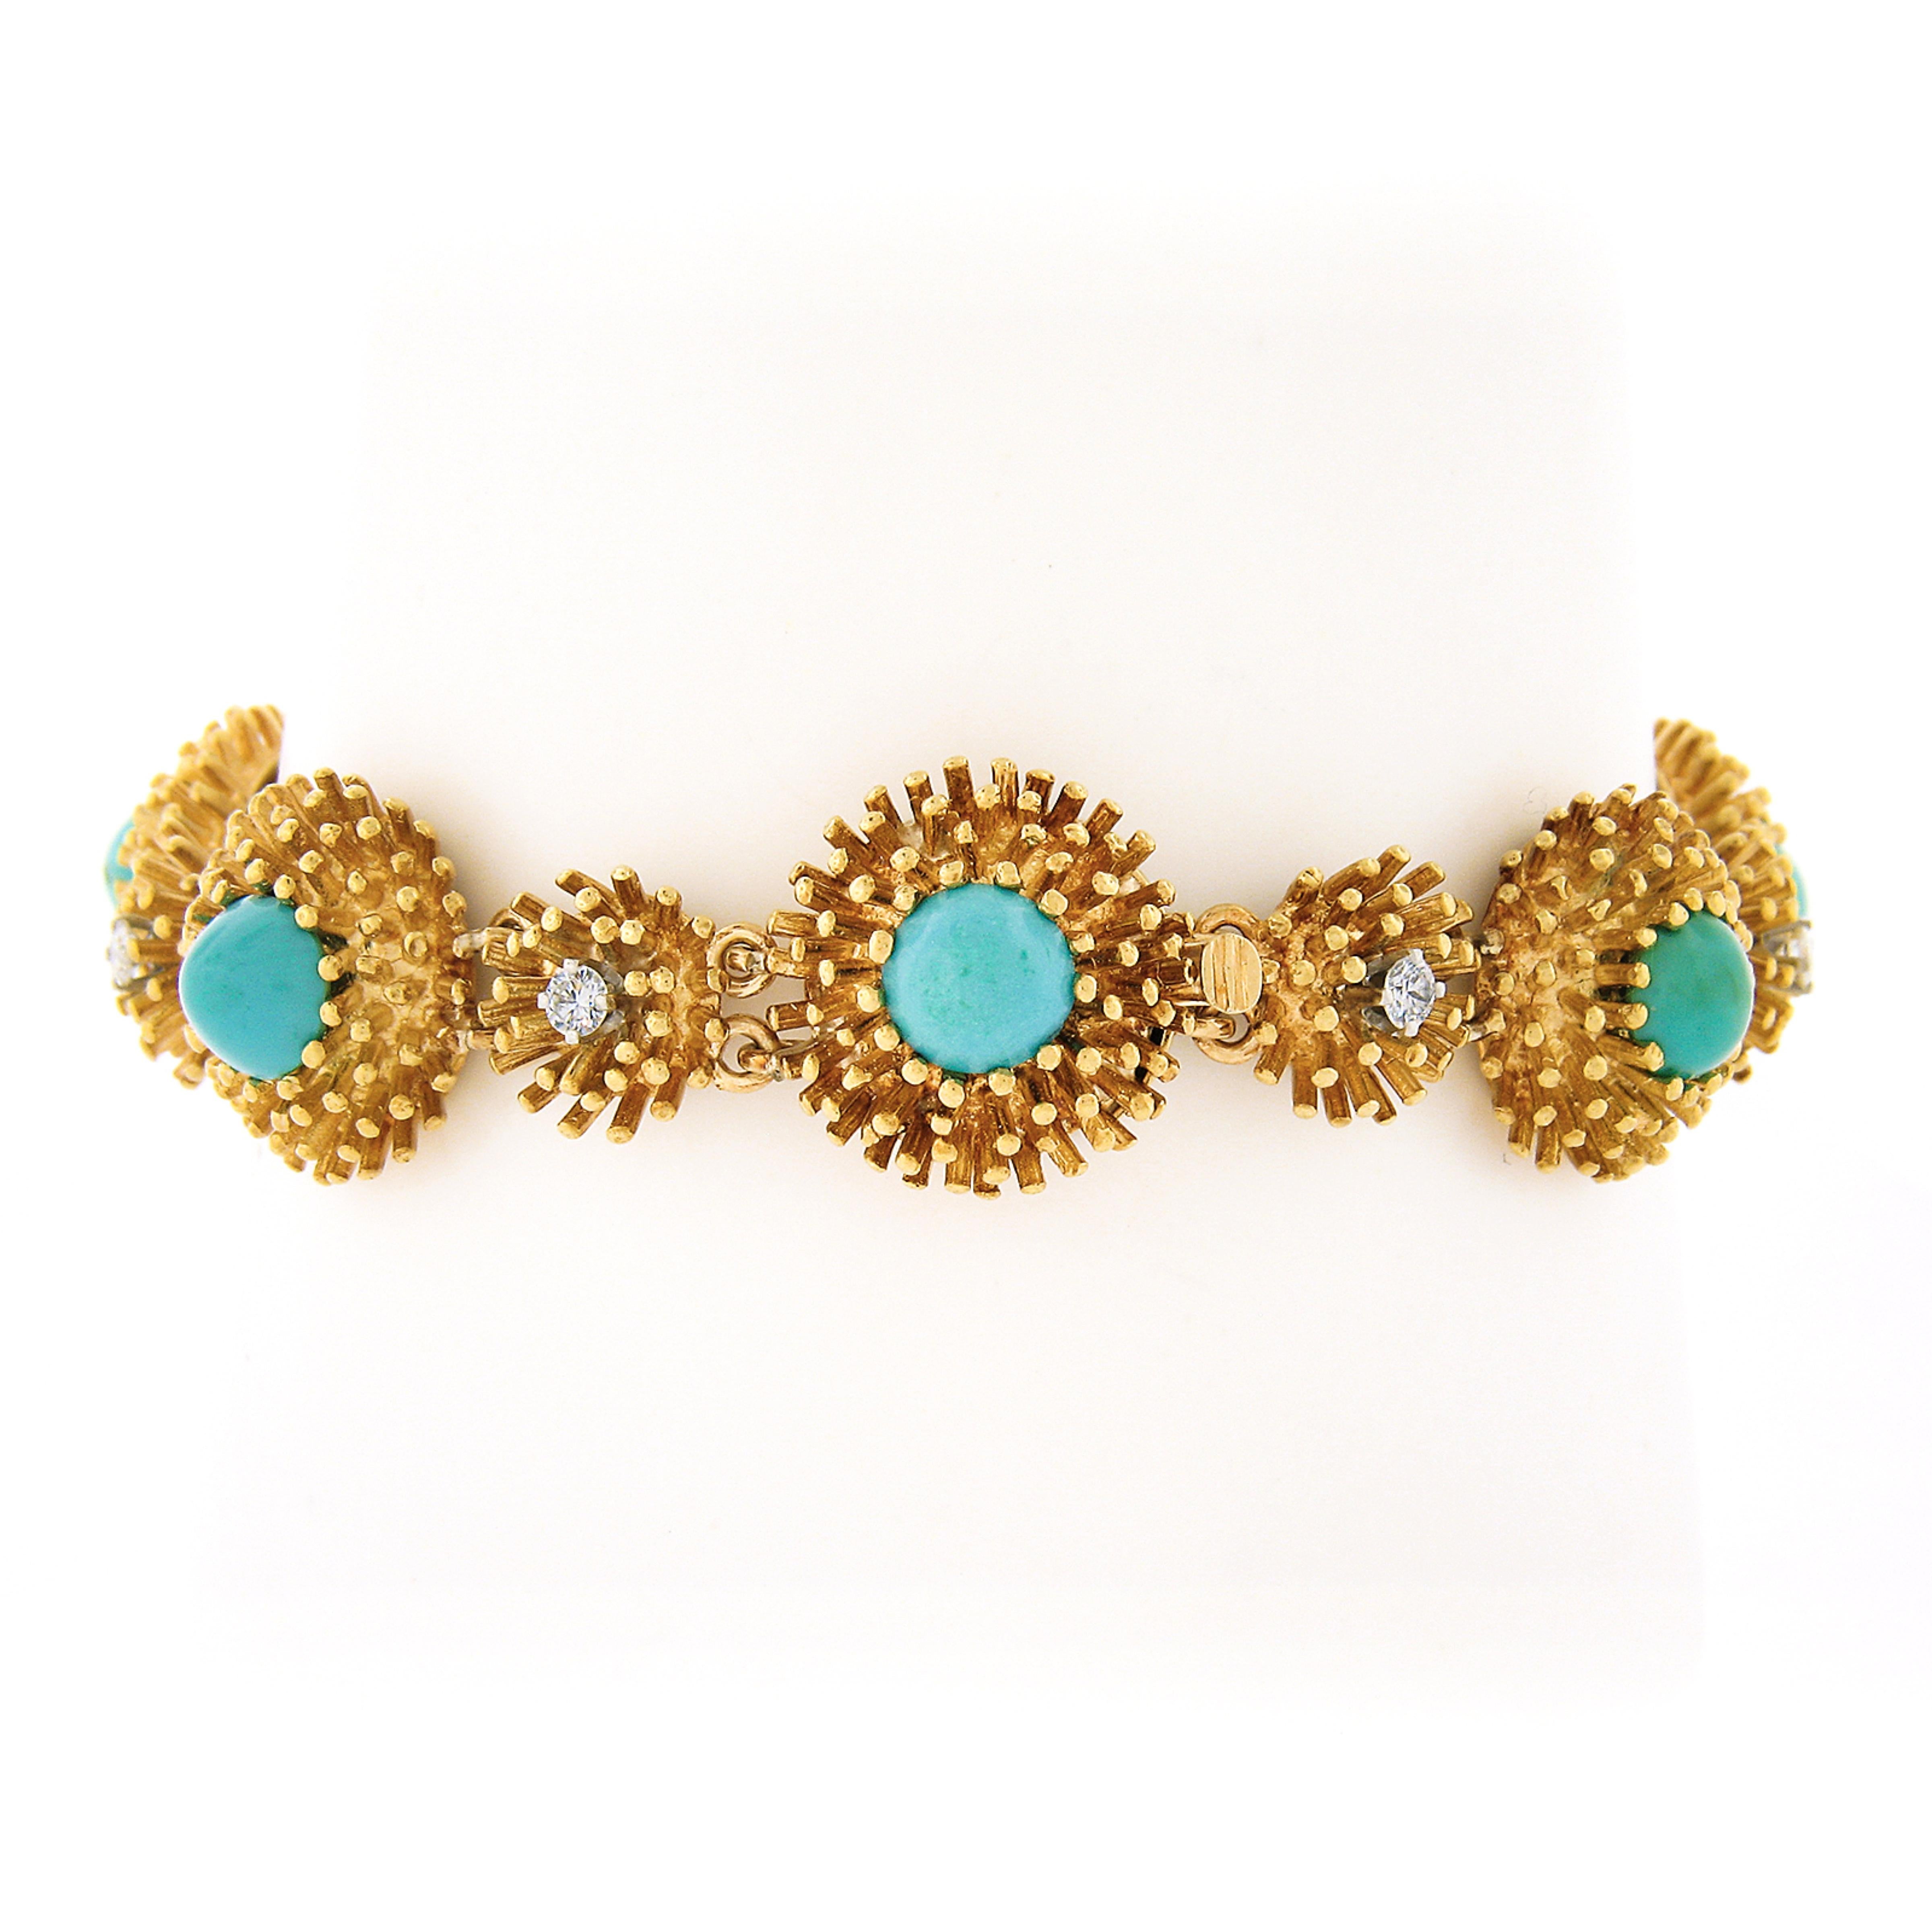 Here we have a breathtaking, handmade, vintage statement bracelet crafted in solid 18k yellow gold and features very fine and highly detailed craftsmanship and is set with approximaltey 0.45 carats of top quality diamonds and turquoise stones